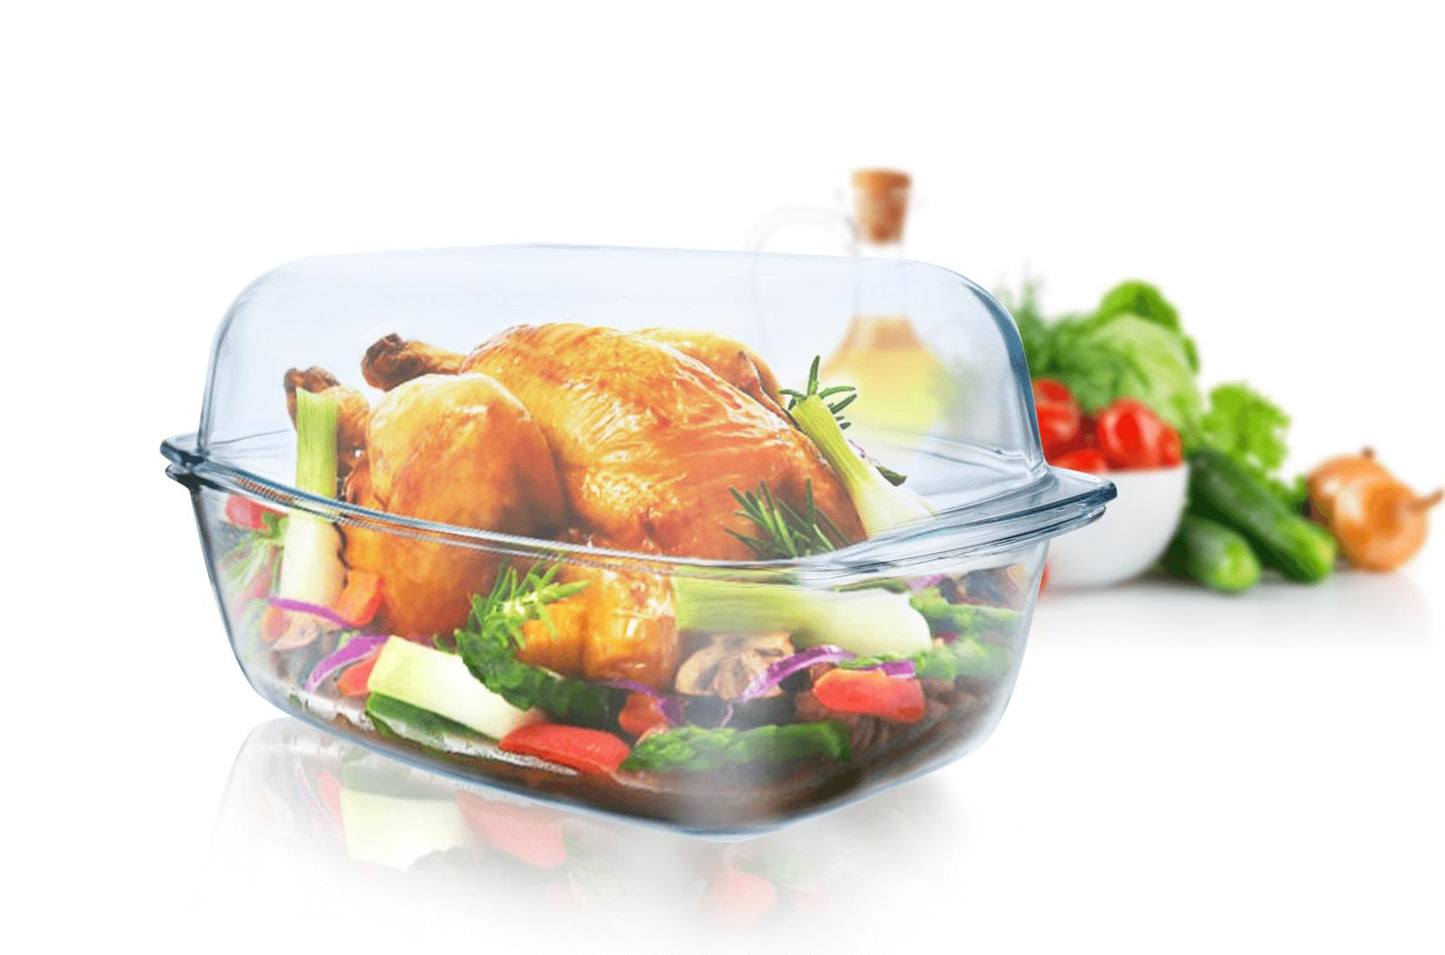 XXL glass roaster 7.0 L with lid casserole dish glass cookware oven dish Made in EU